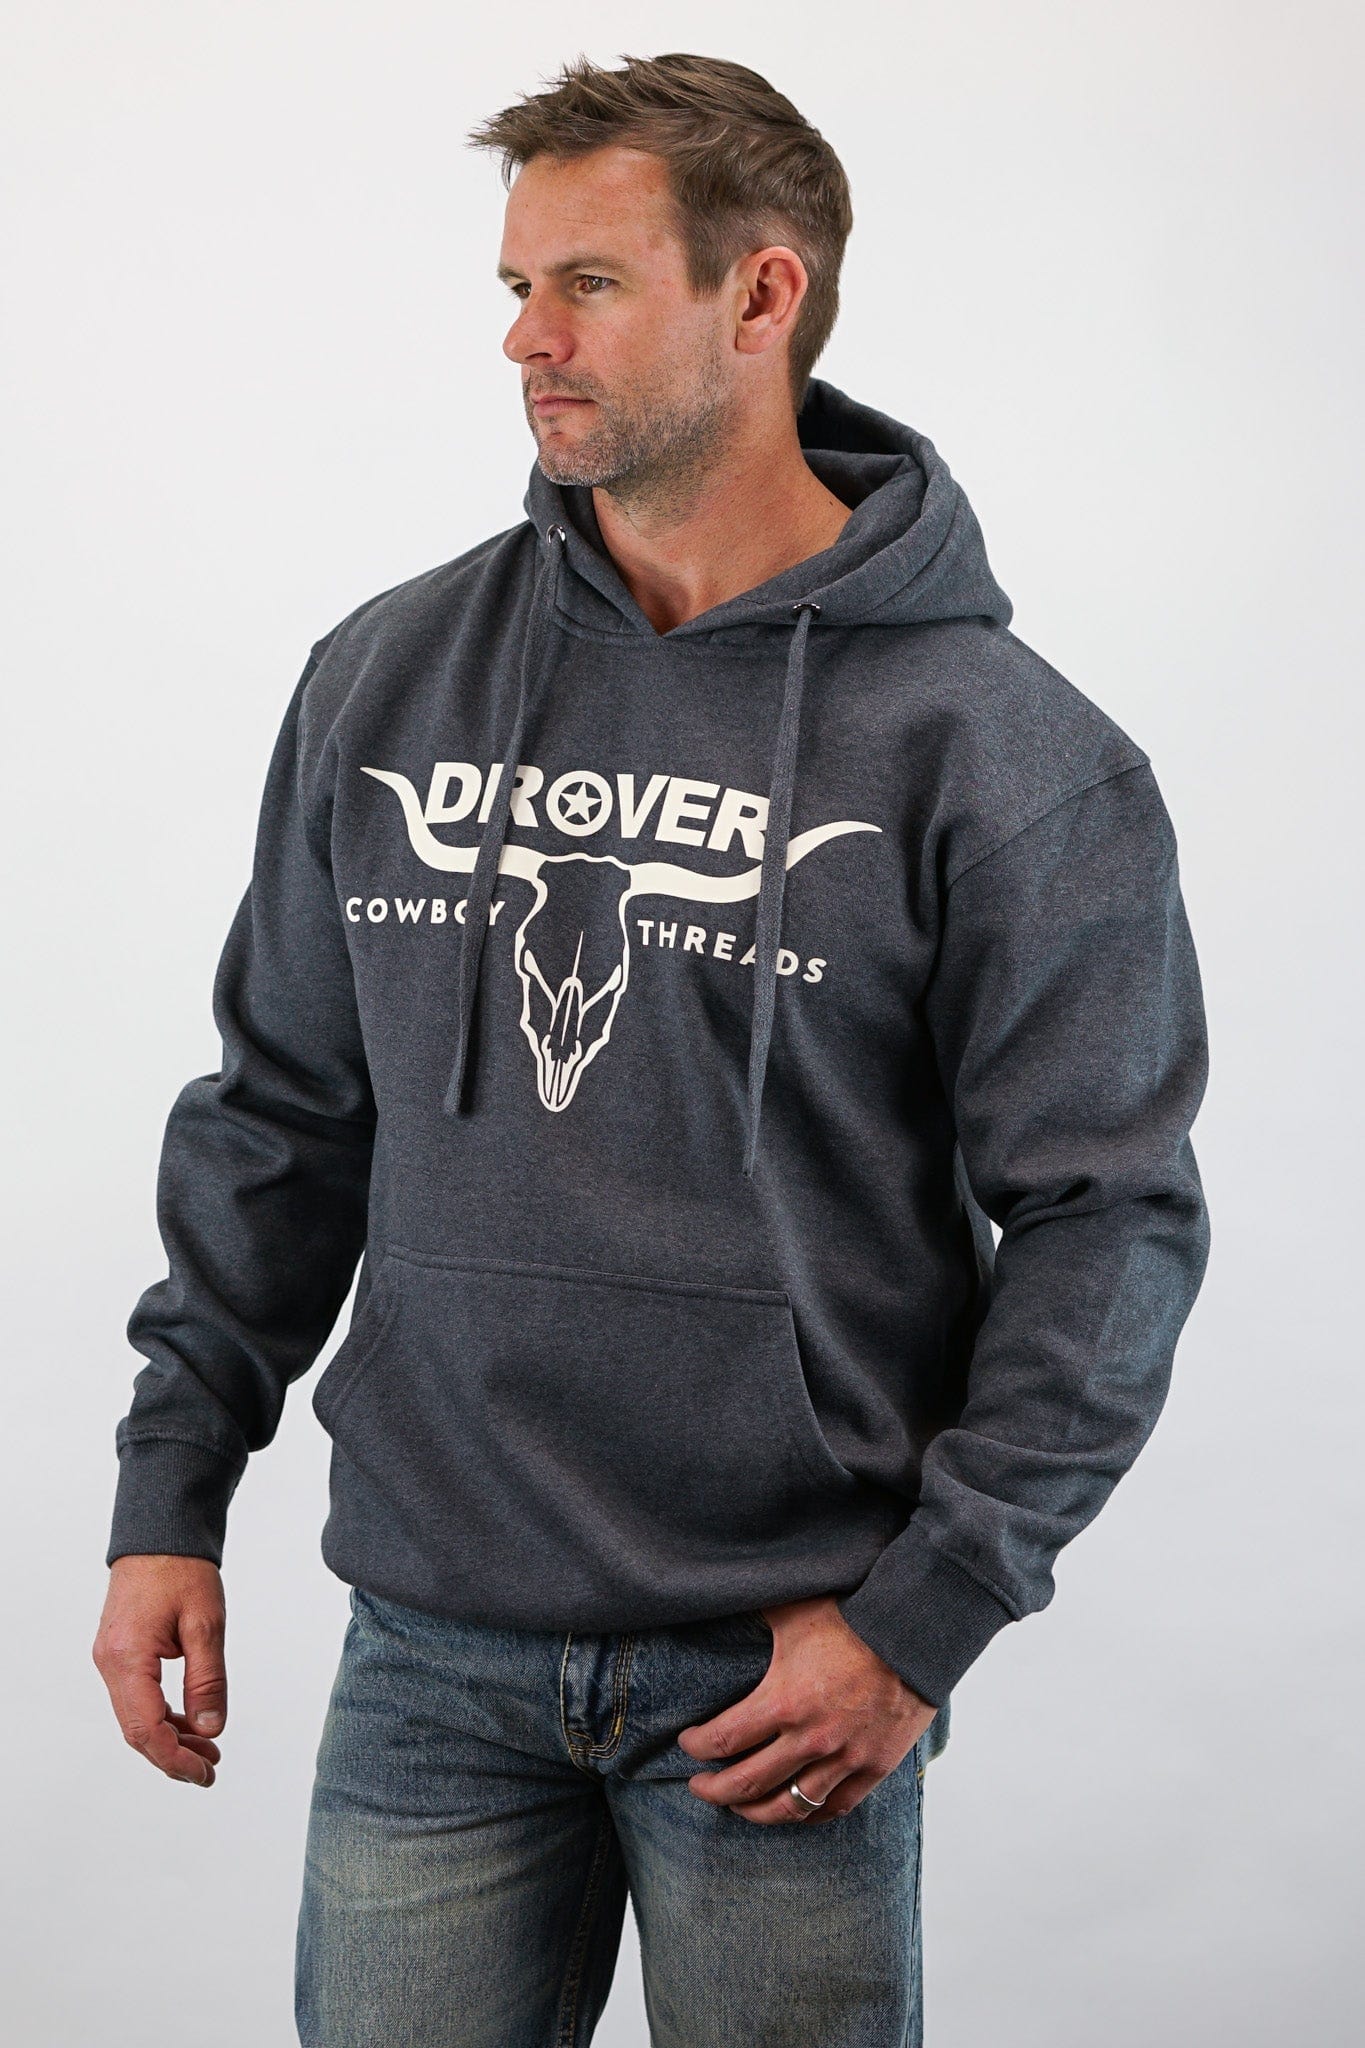 Drover Cowboy Threads Outerwear Hoodie, Drover Logo -Graphite Color